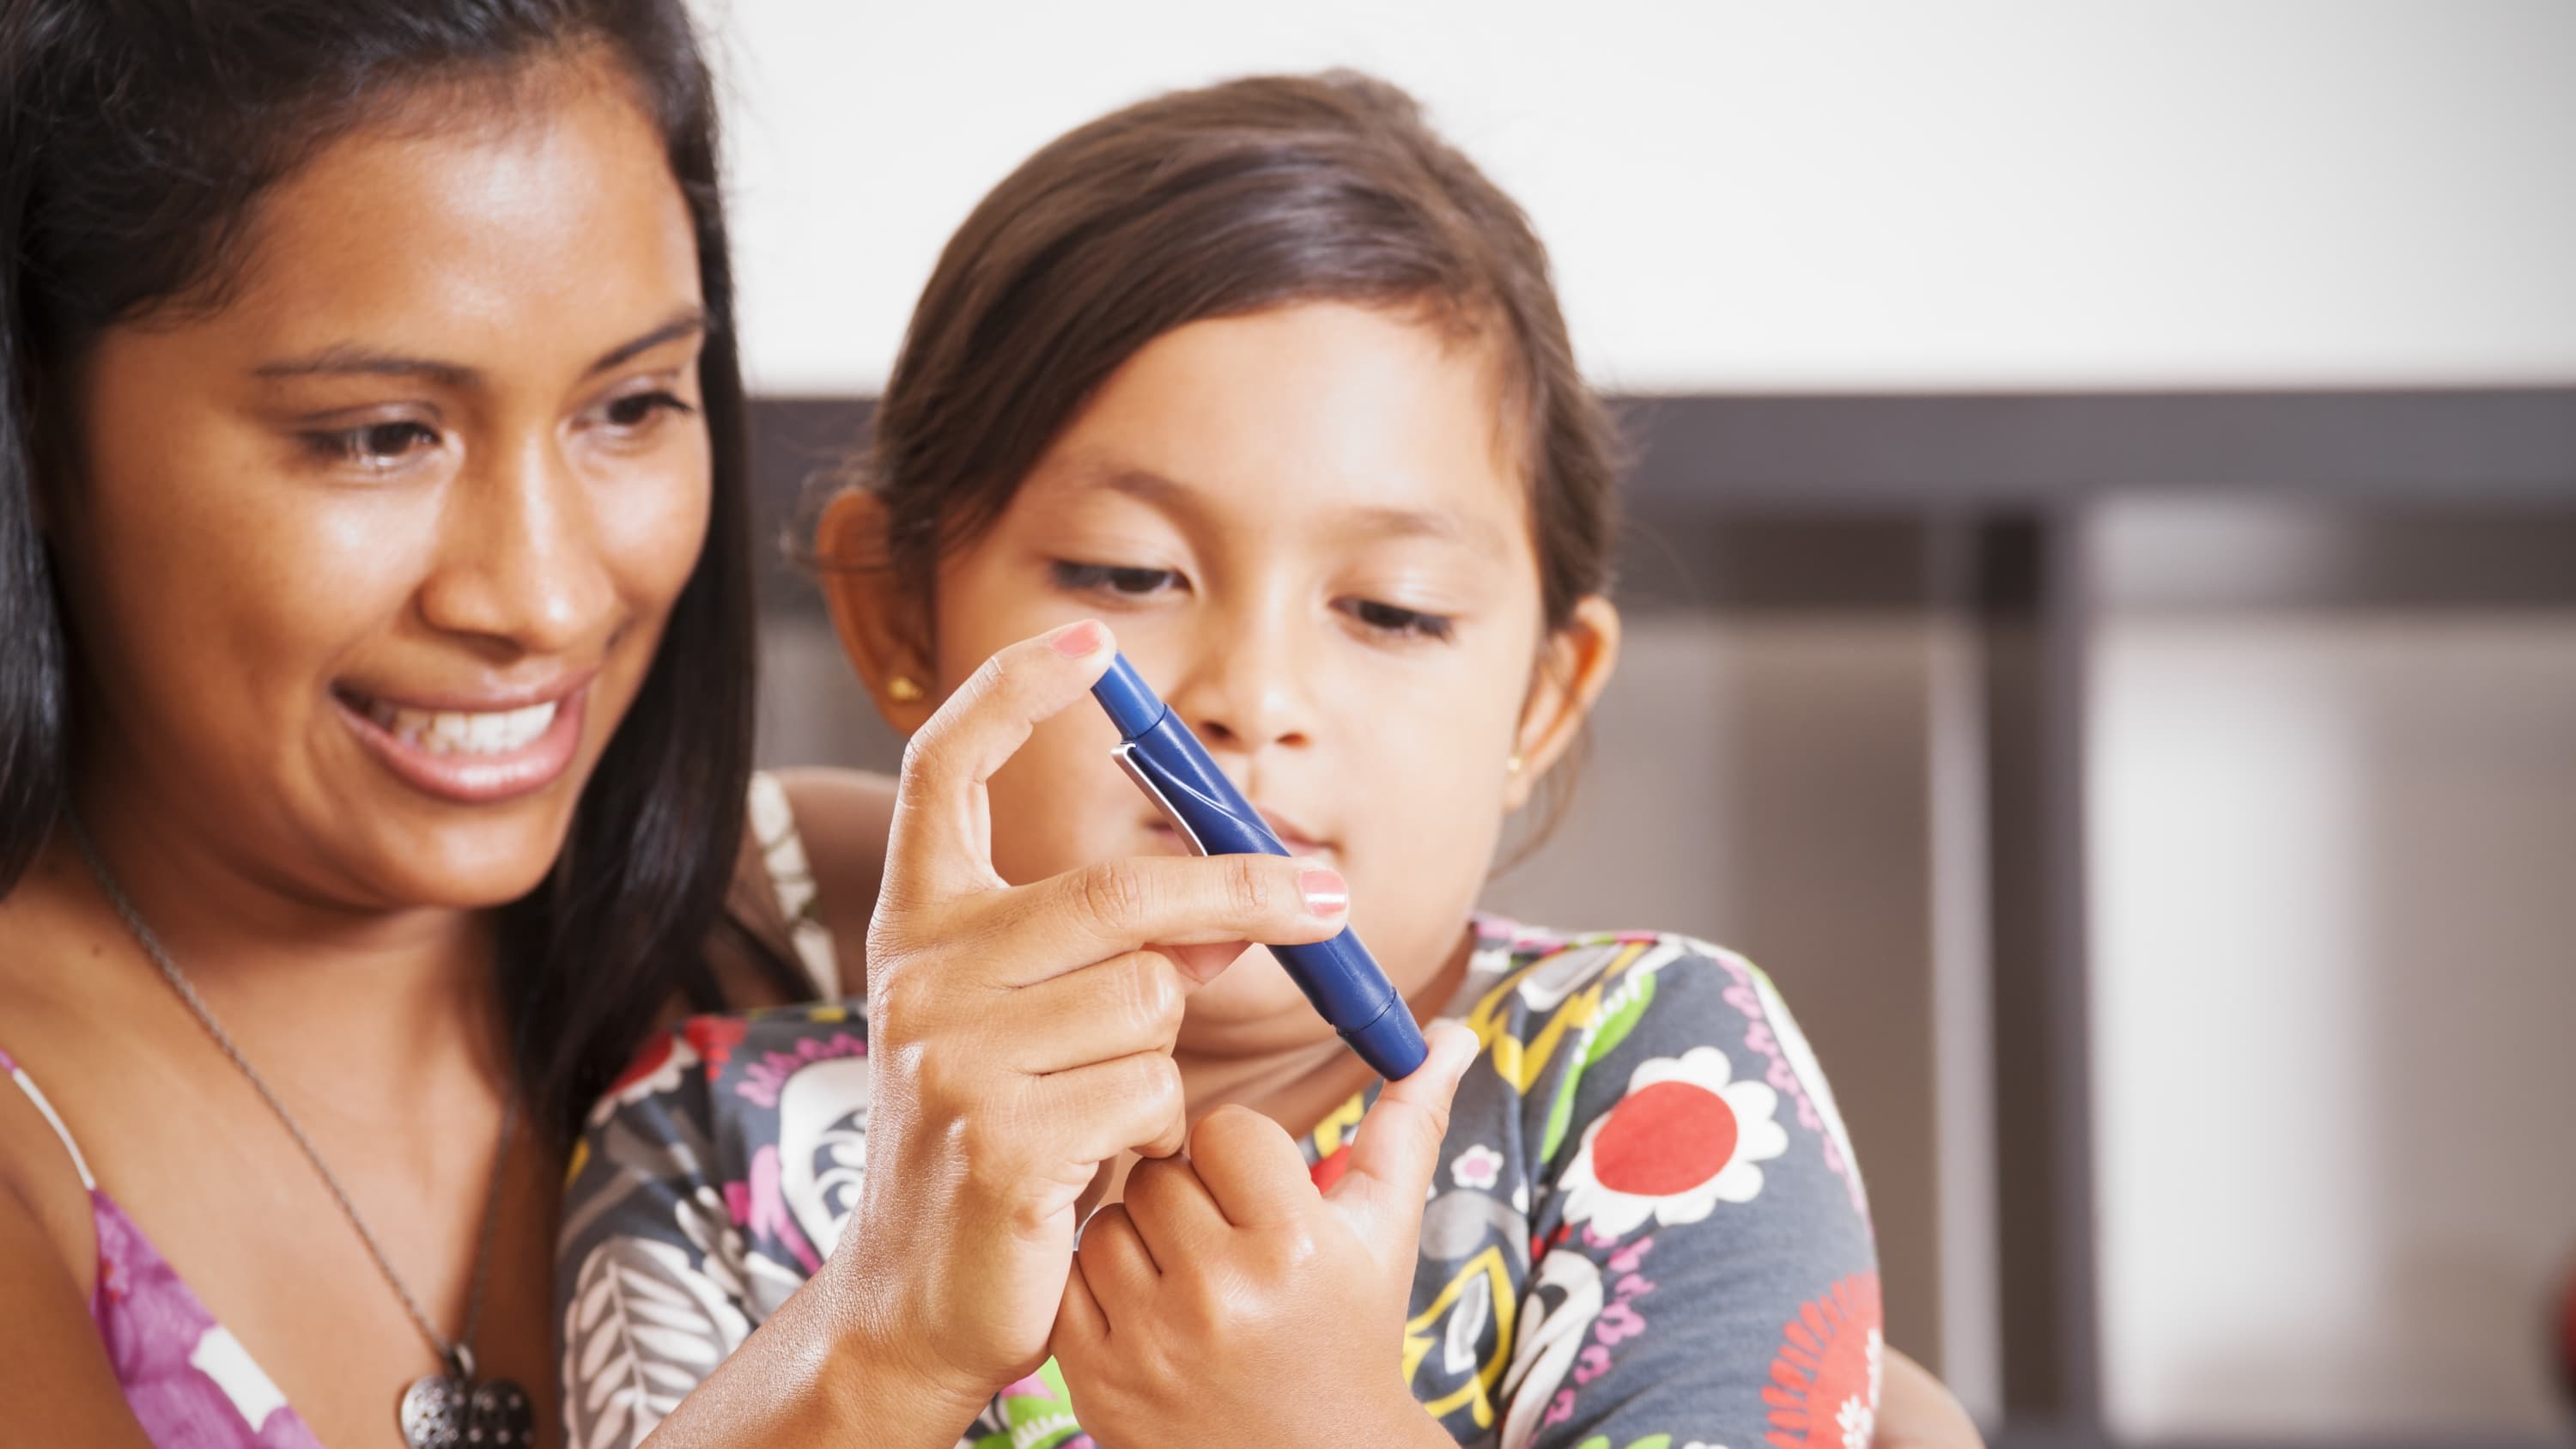 A mother helps her young daughter use a device to test blood sugar in people with diabetes